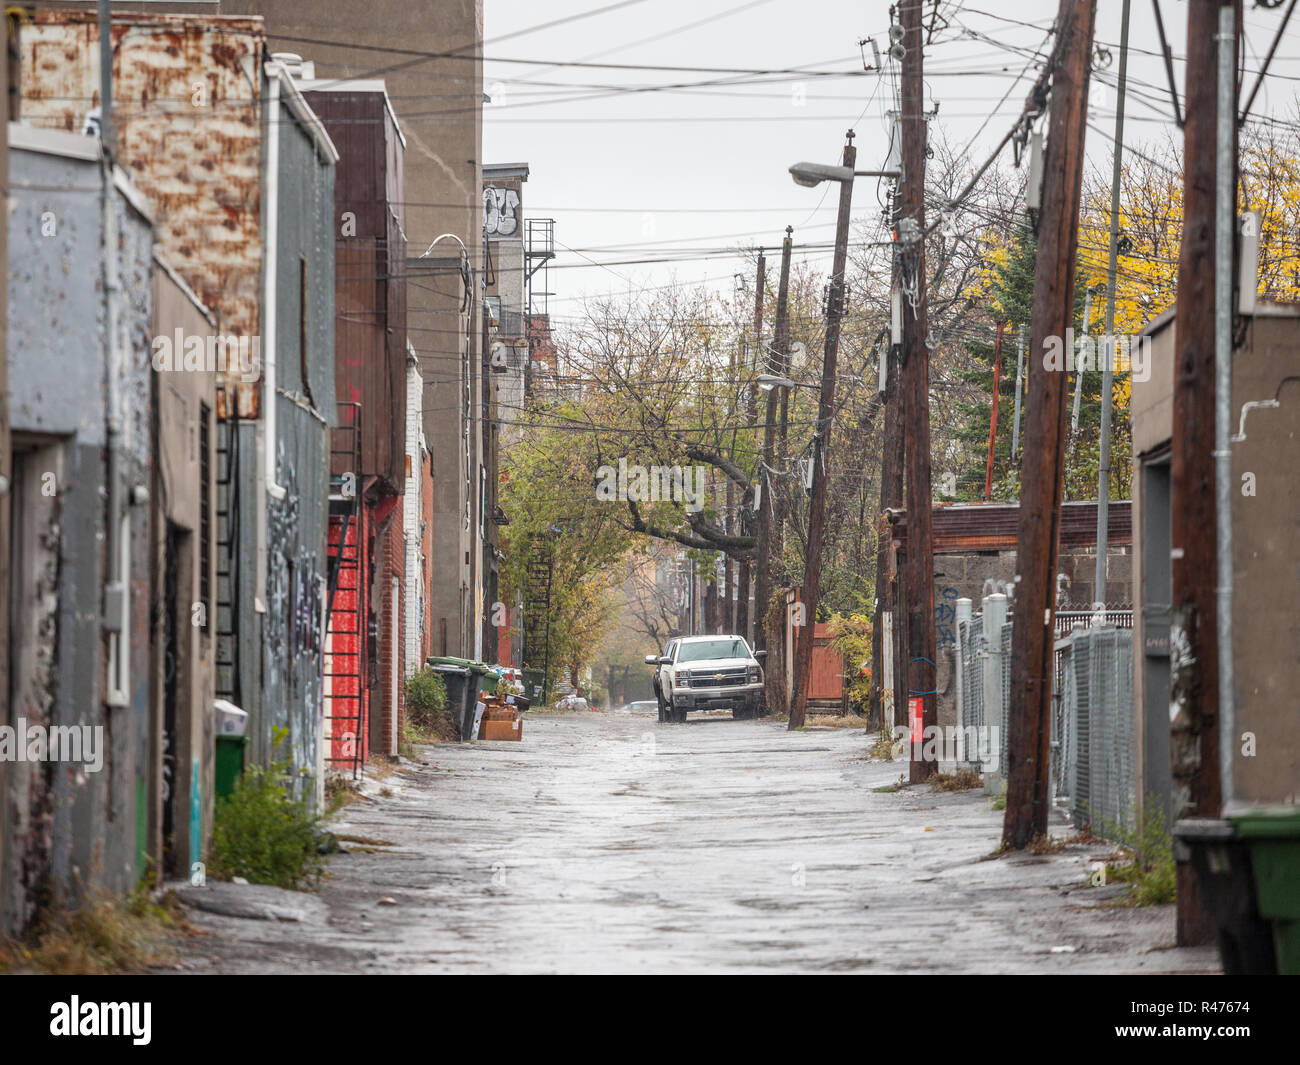 MONTREAL, CANADA - NOVEMBER 3, 2018: Dilapidated typical north American residential street in autumn in Montreal, Quebec, during a rainy day, with car Stock Photo